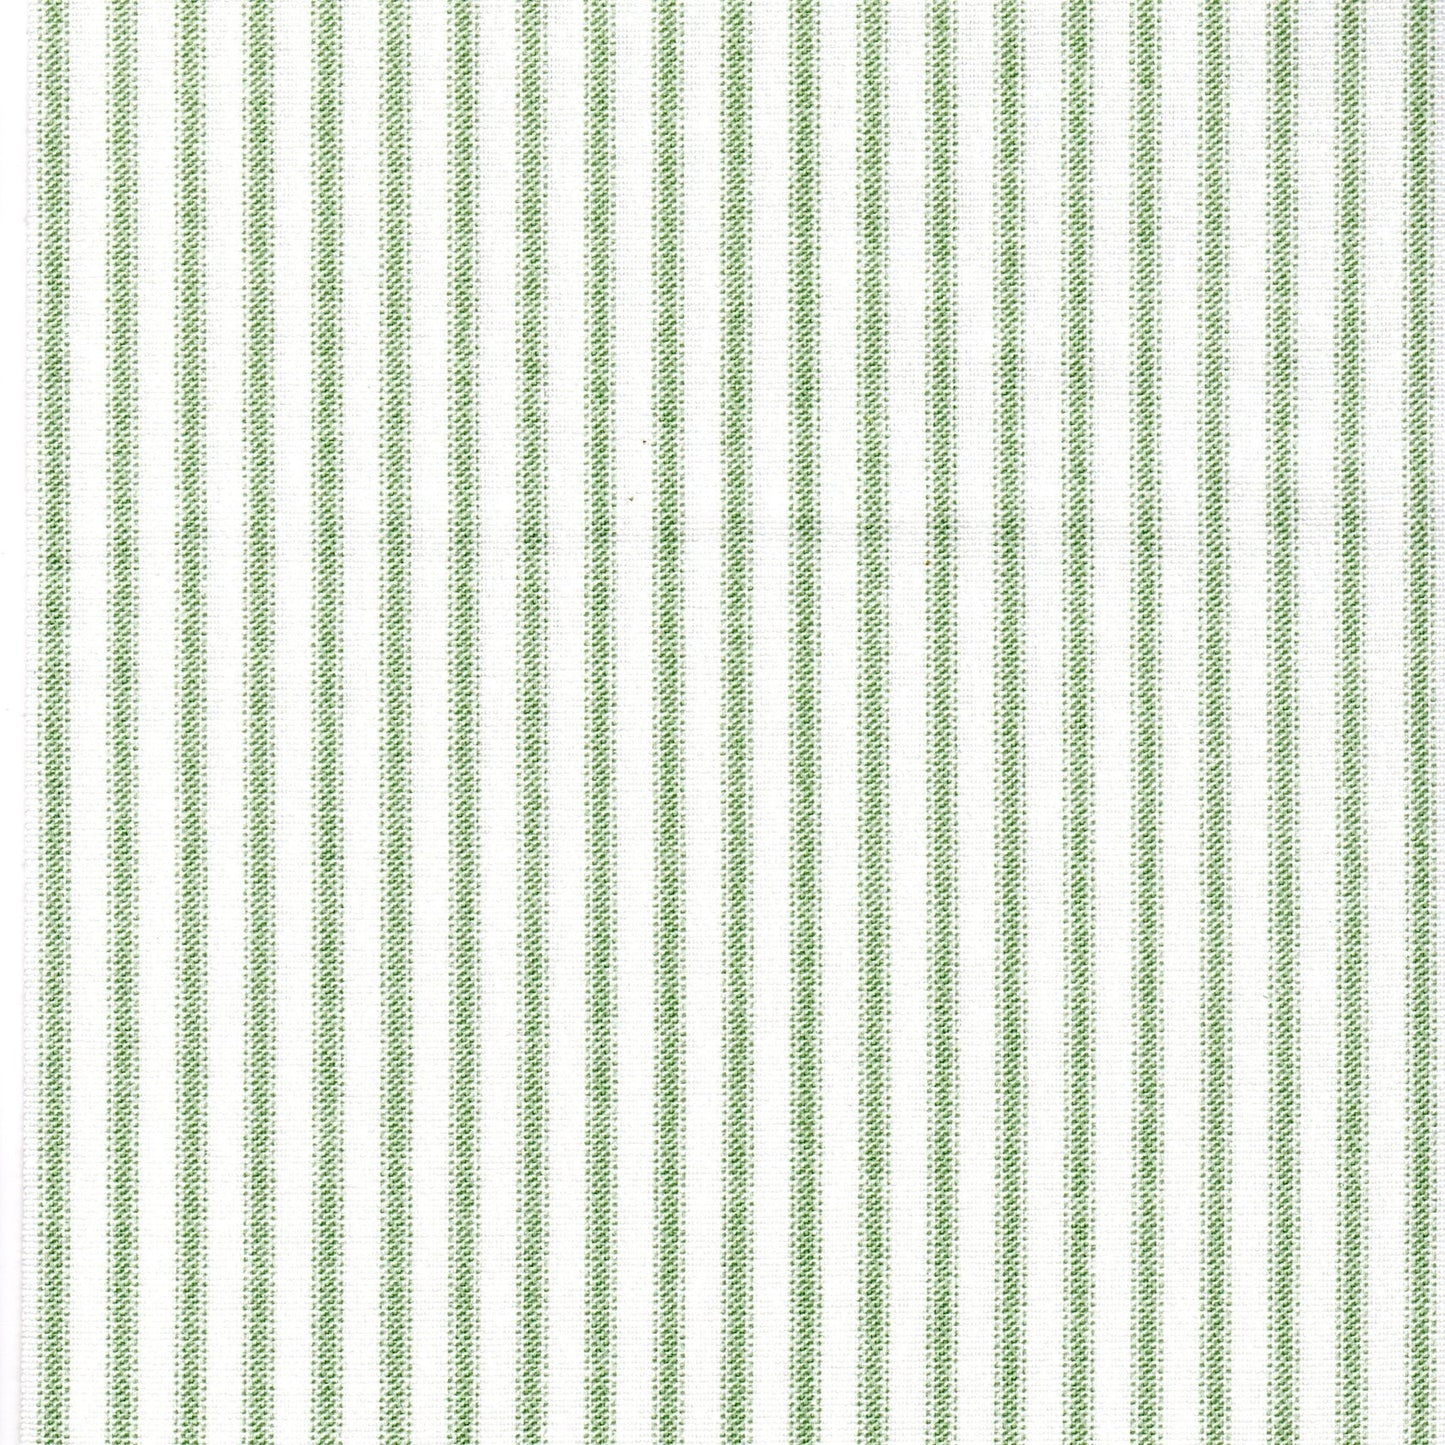 tab top curtains in Classic Sage Green Ticking Stripe on White